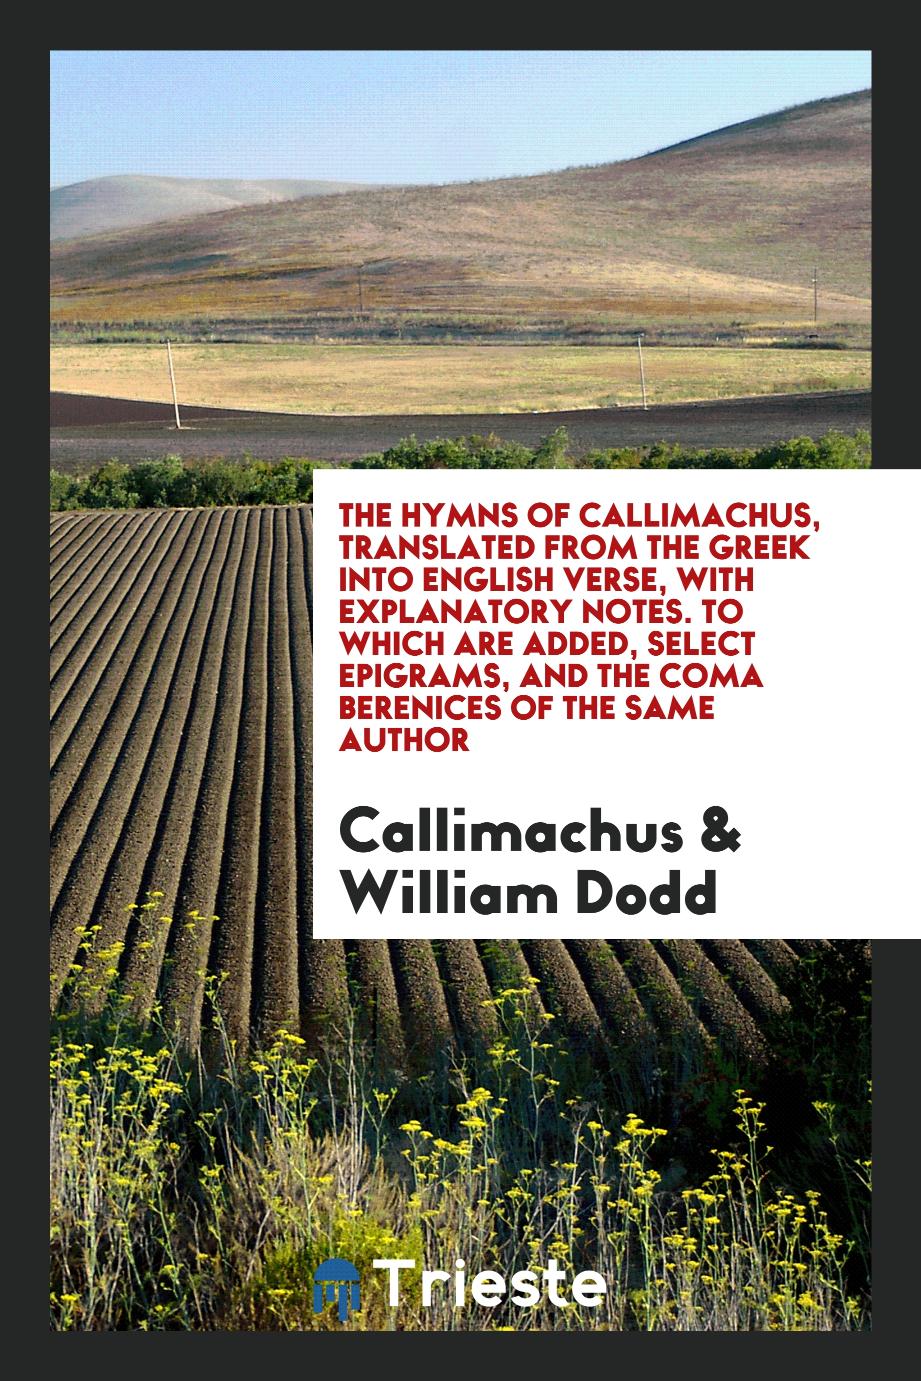 The Hymns of Callimachus, Translated From the Greek Into English Verse, With Explanatory Notes. To Which Are Added, Select Epigrams, and the Coma Berenices of the Same Author